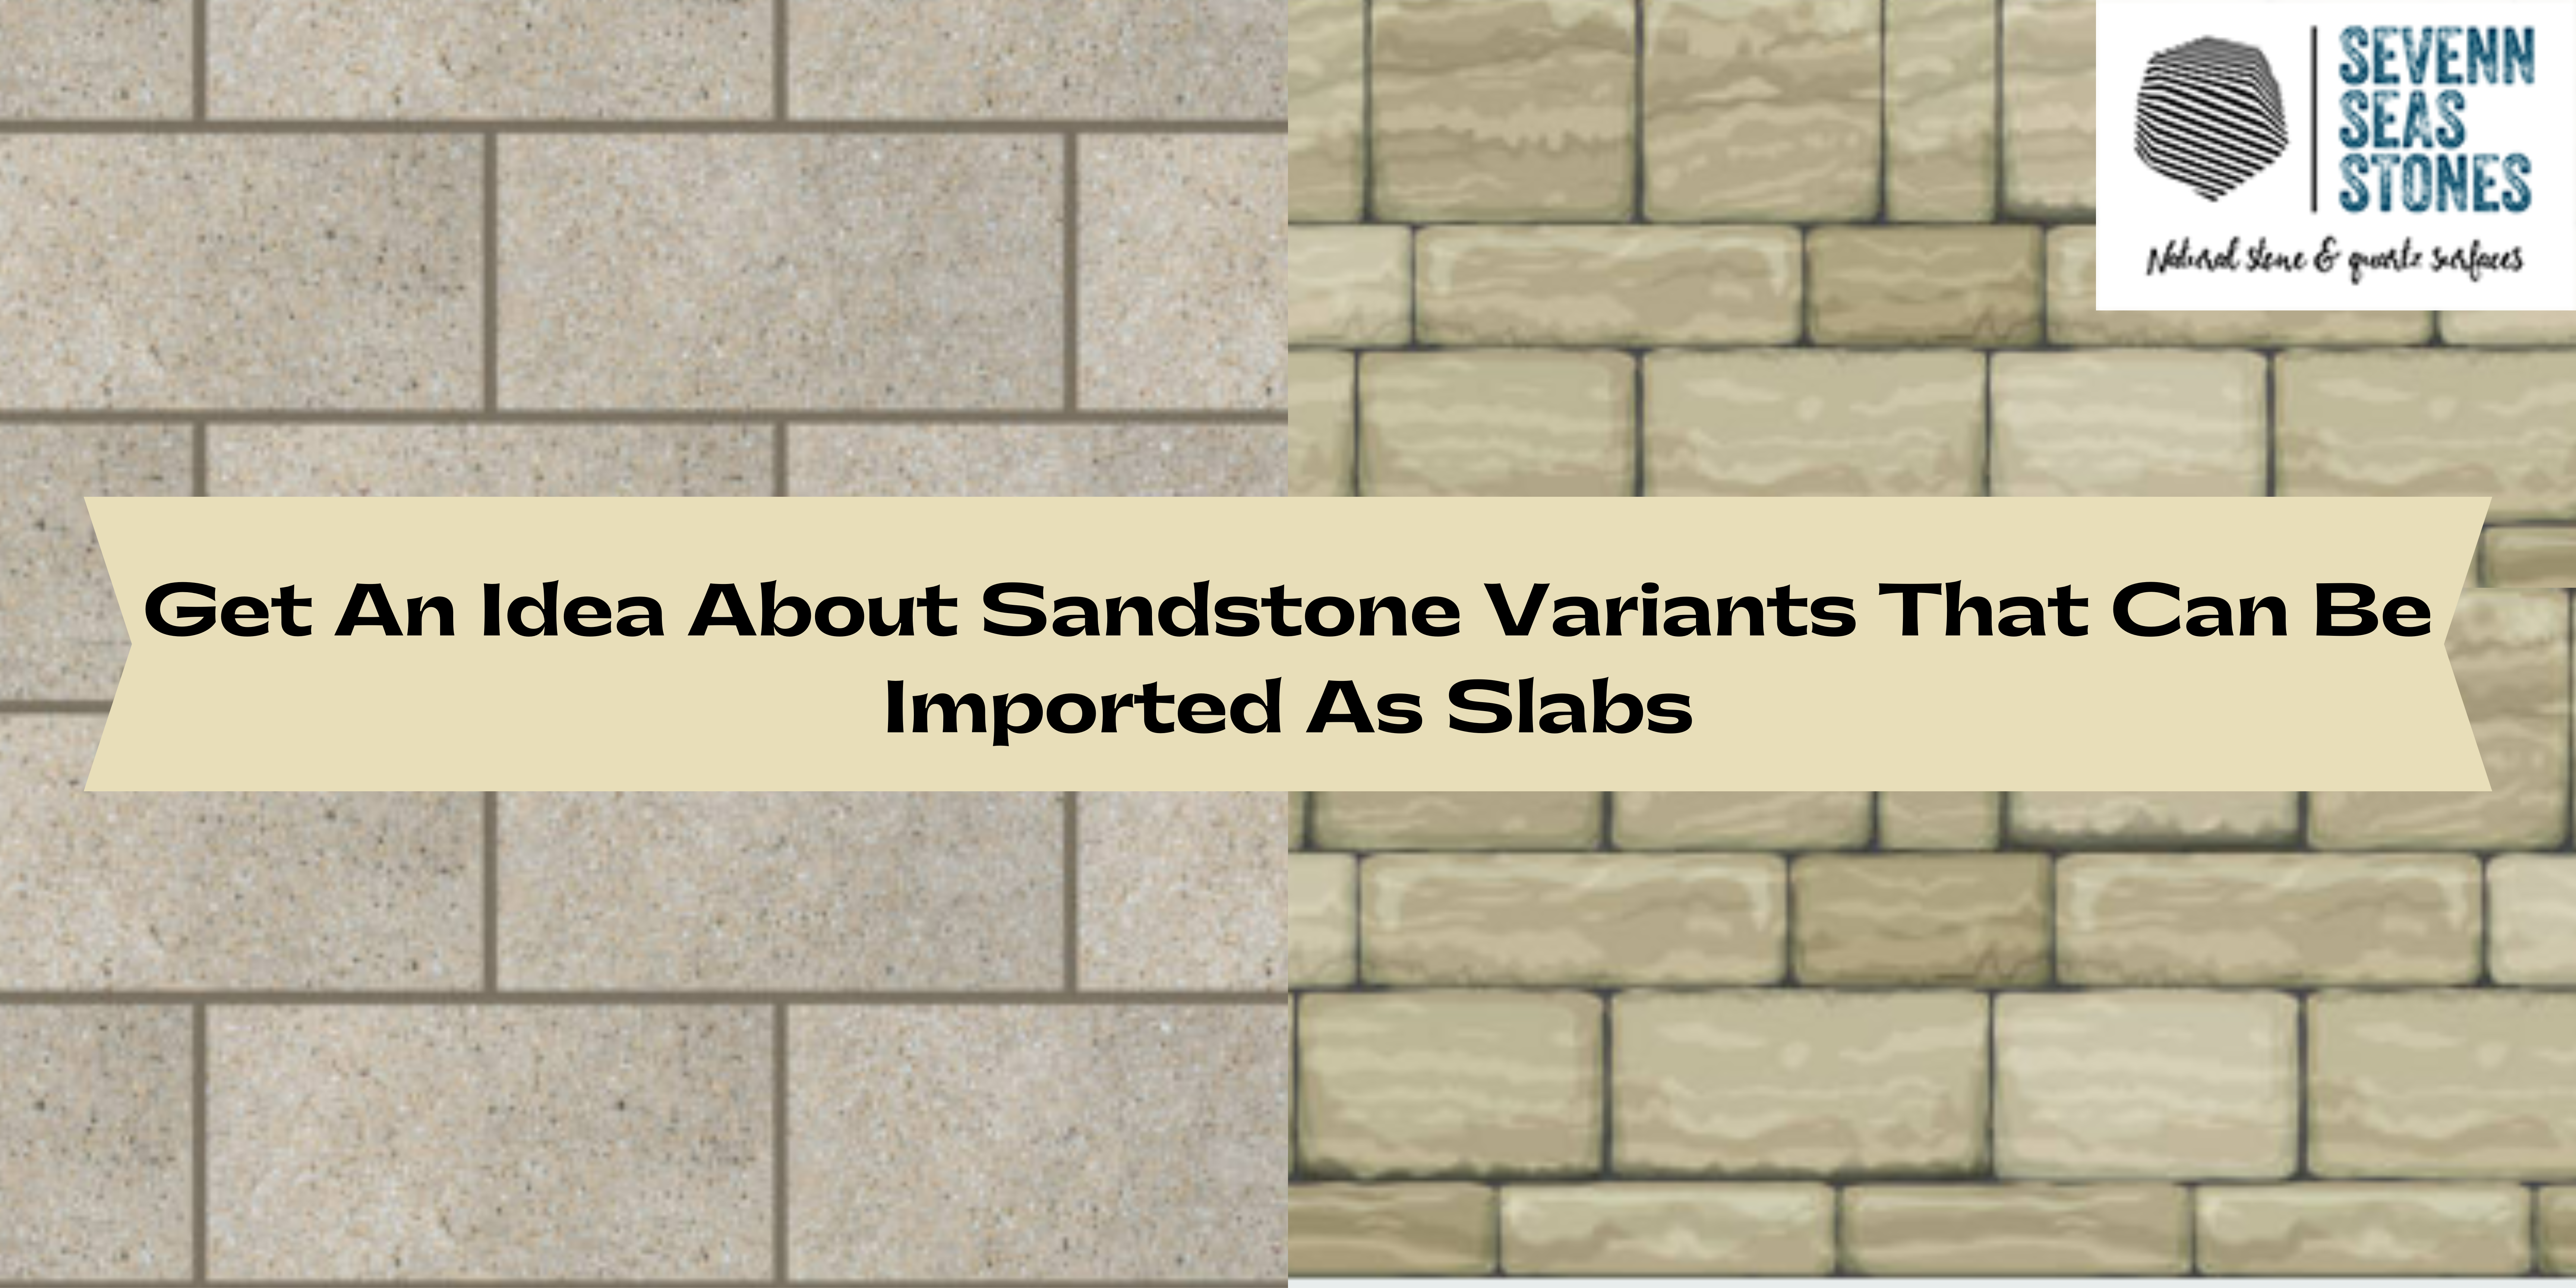 blog-Get An Idea About Sandstone Variants That Can Be Imported As Slabs